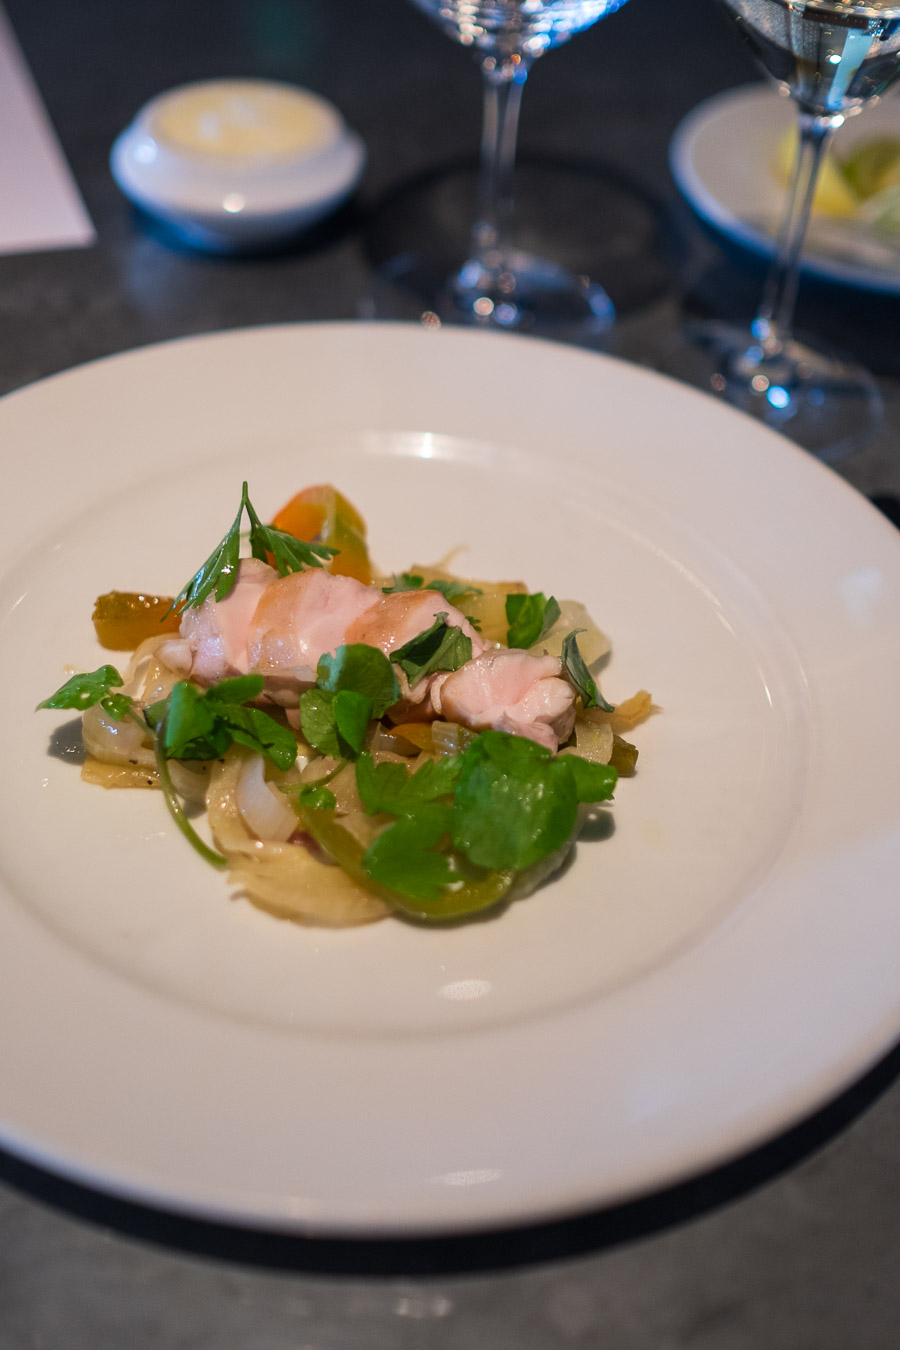 Rabbit escabeche, heirloom pepper, fennel, cress - paired with Mt Beautiful Sauvignon Blanc 2013